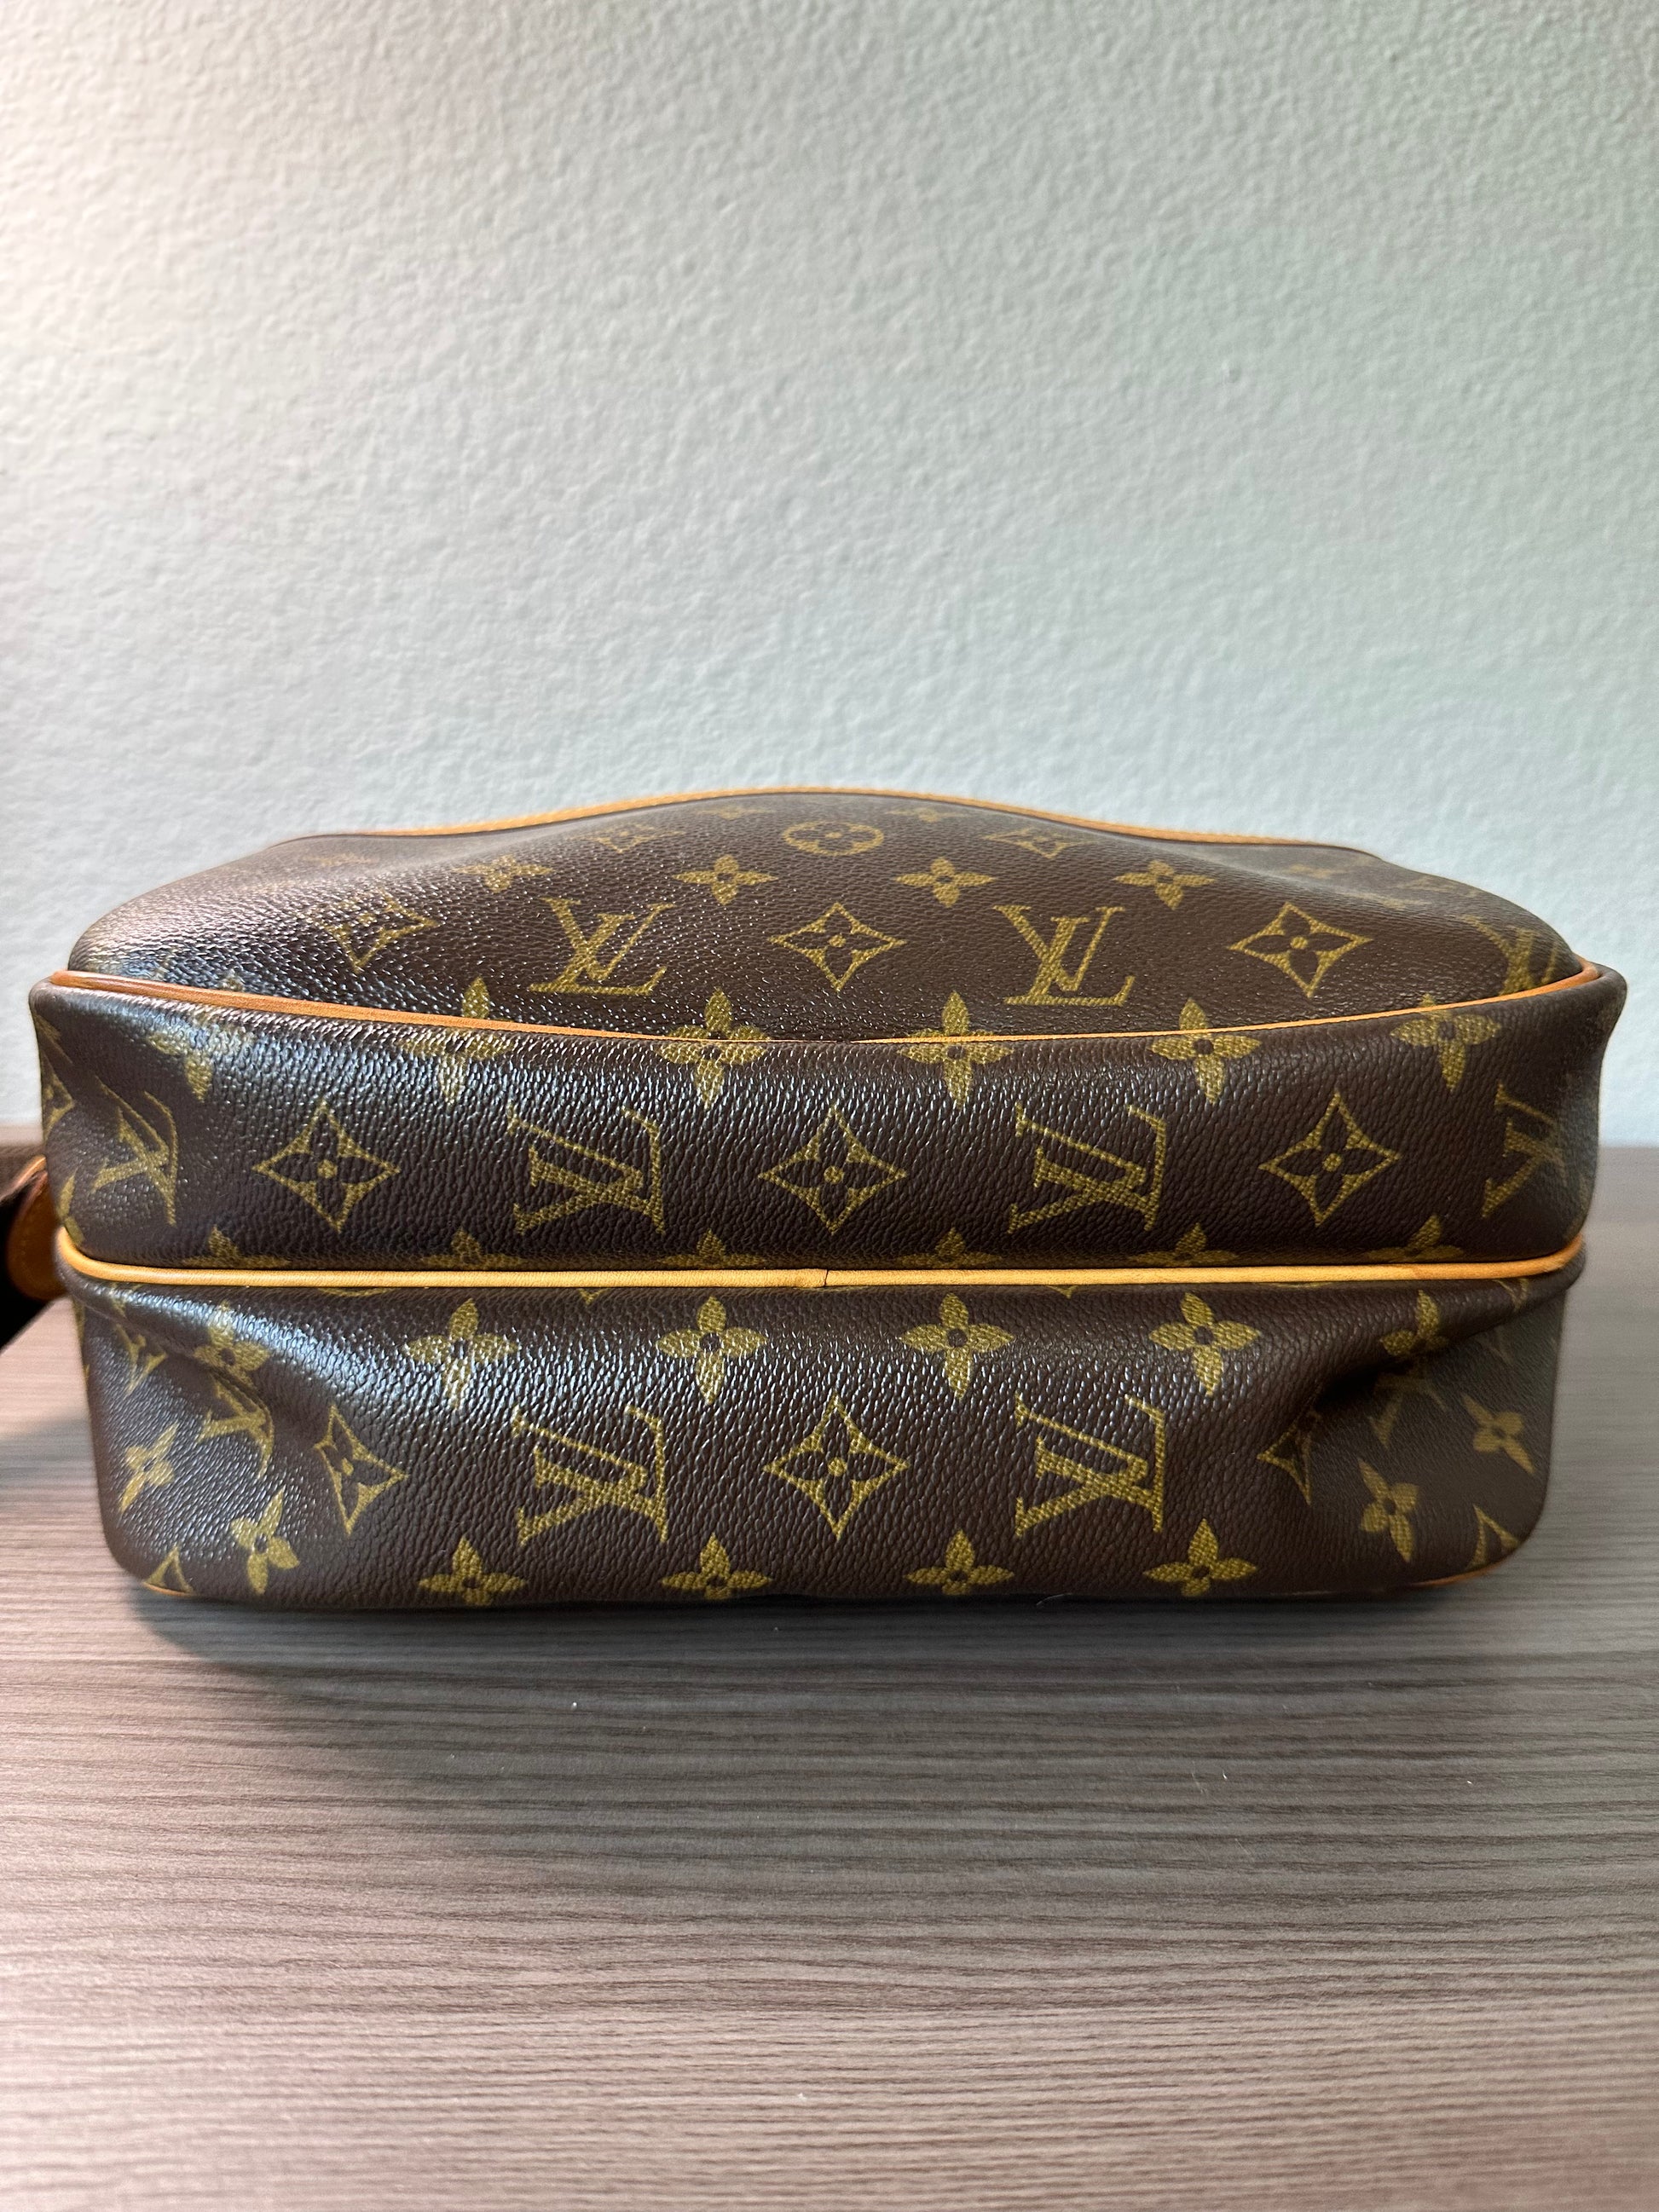 Pre-Owned Louis Vuitton Reporter Monogram PM Brown 